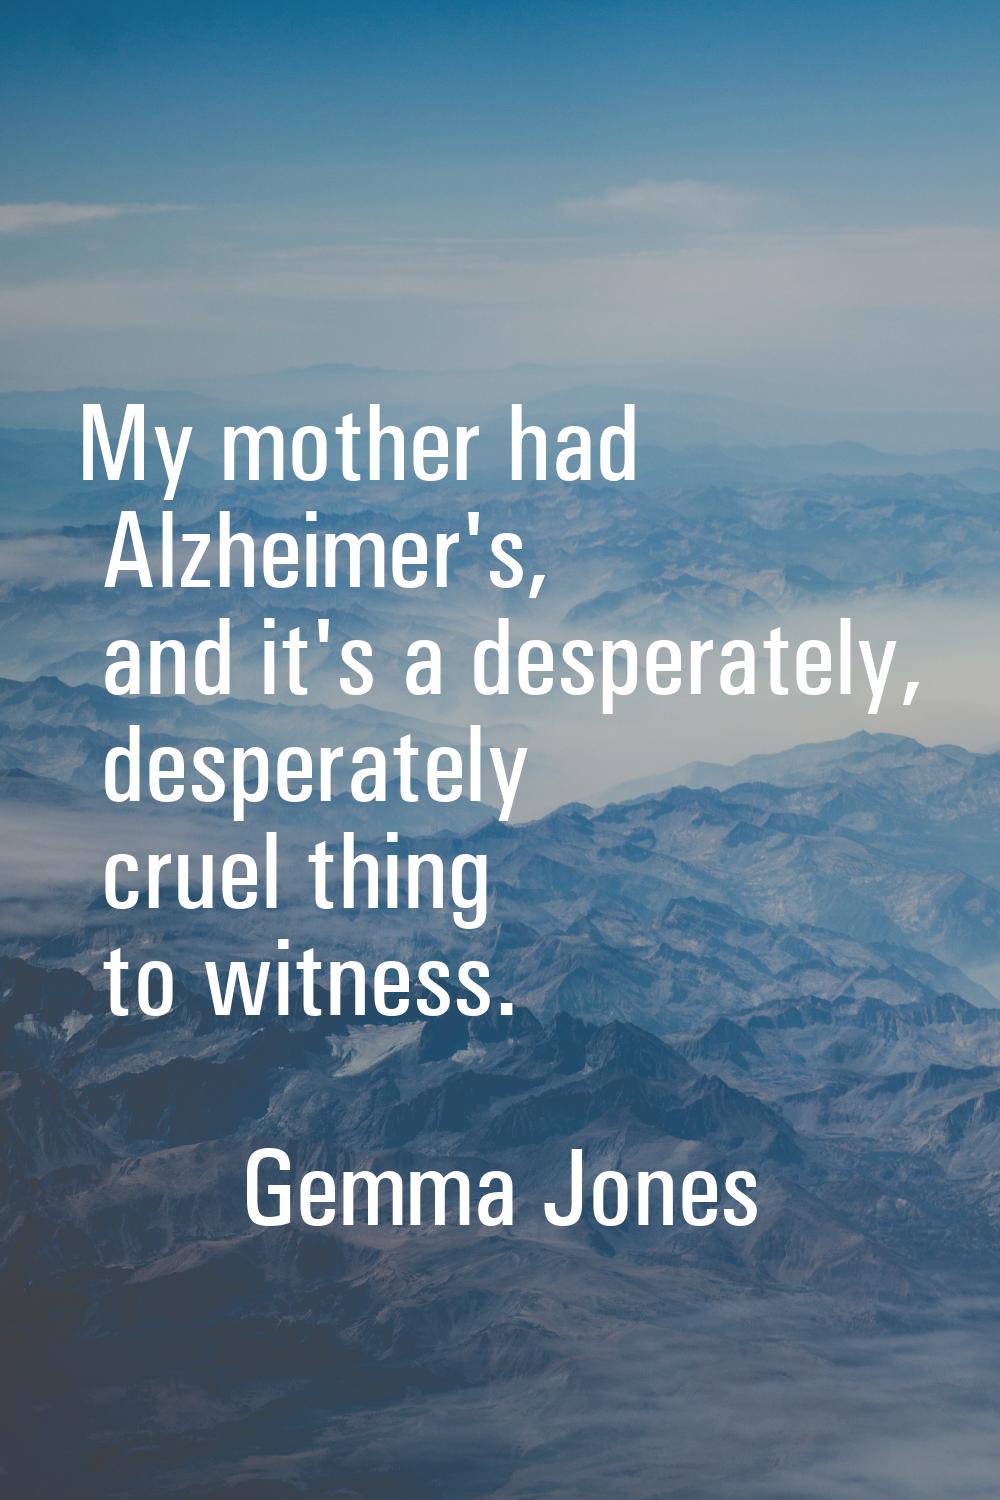 My mother had Alzheimer's, and it's a desperately, desperately cruel thing to witness.